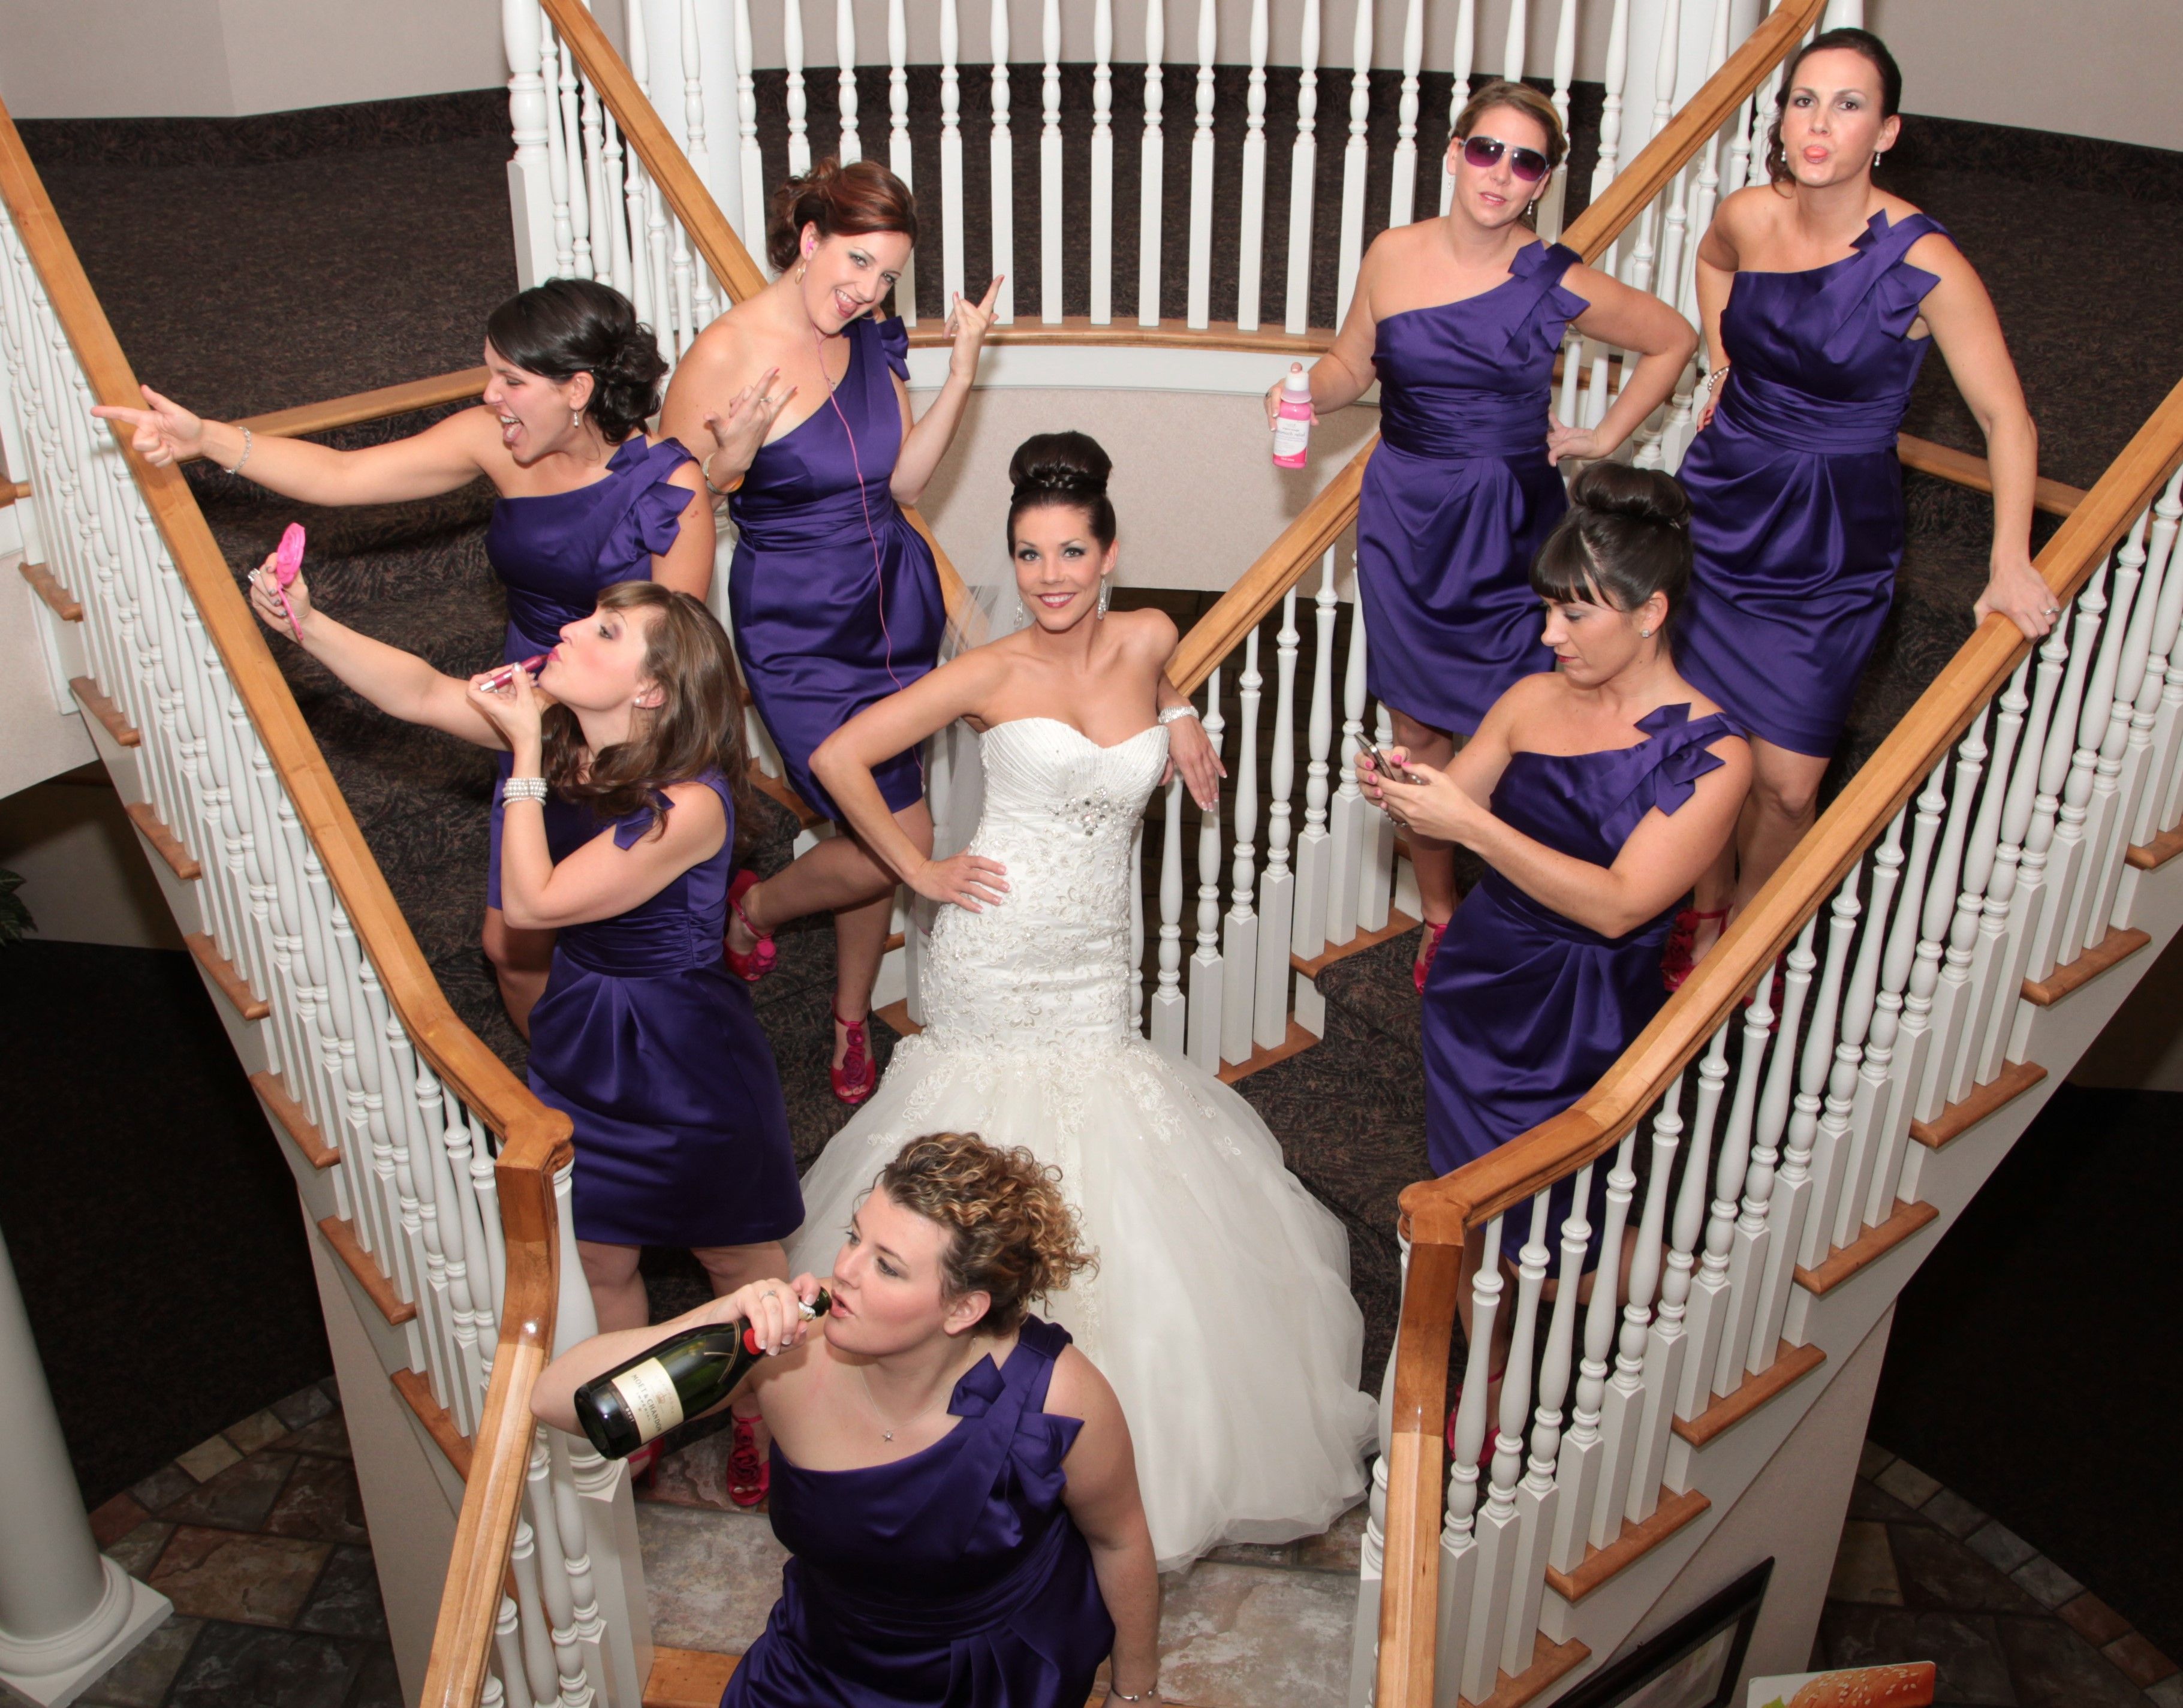 Beautiful Bridesmaids' Moments – A Must For Your Wedding | Weddingplz